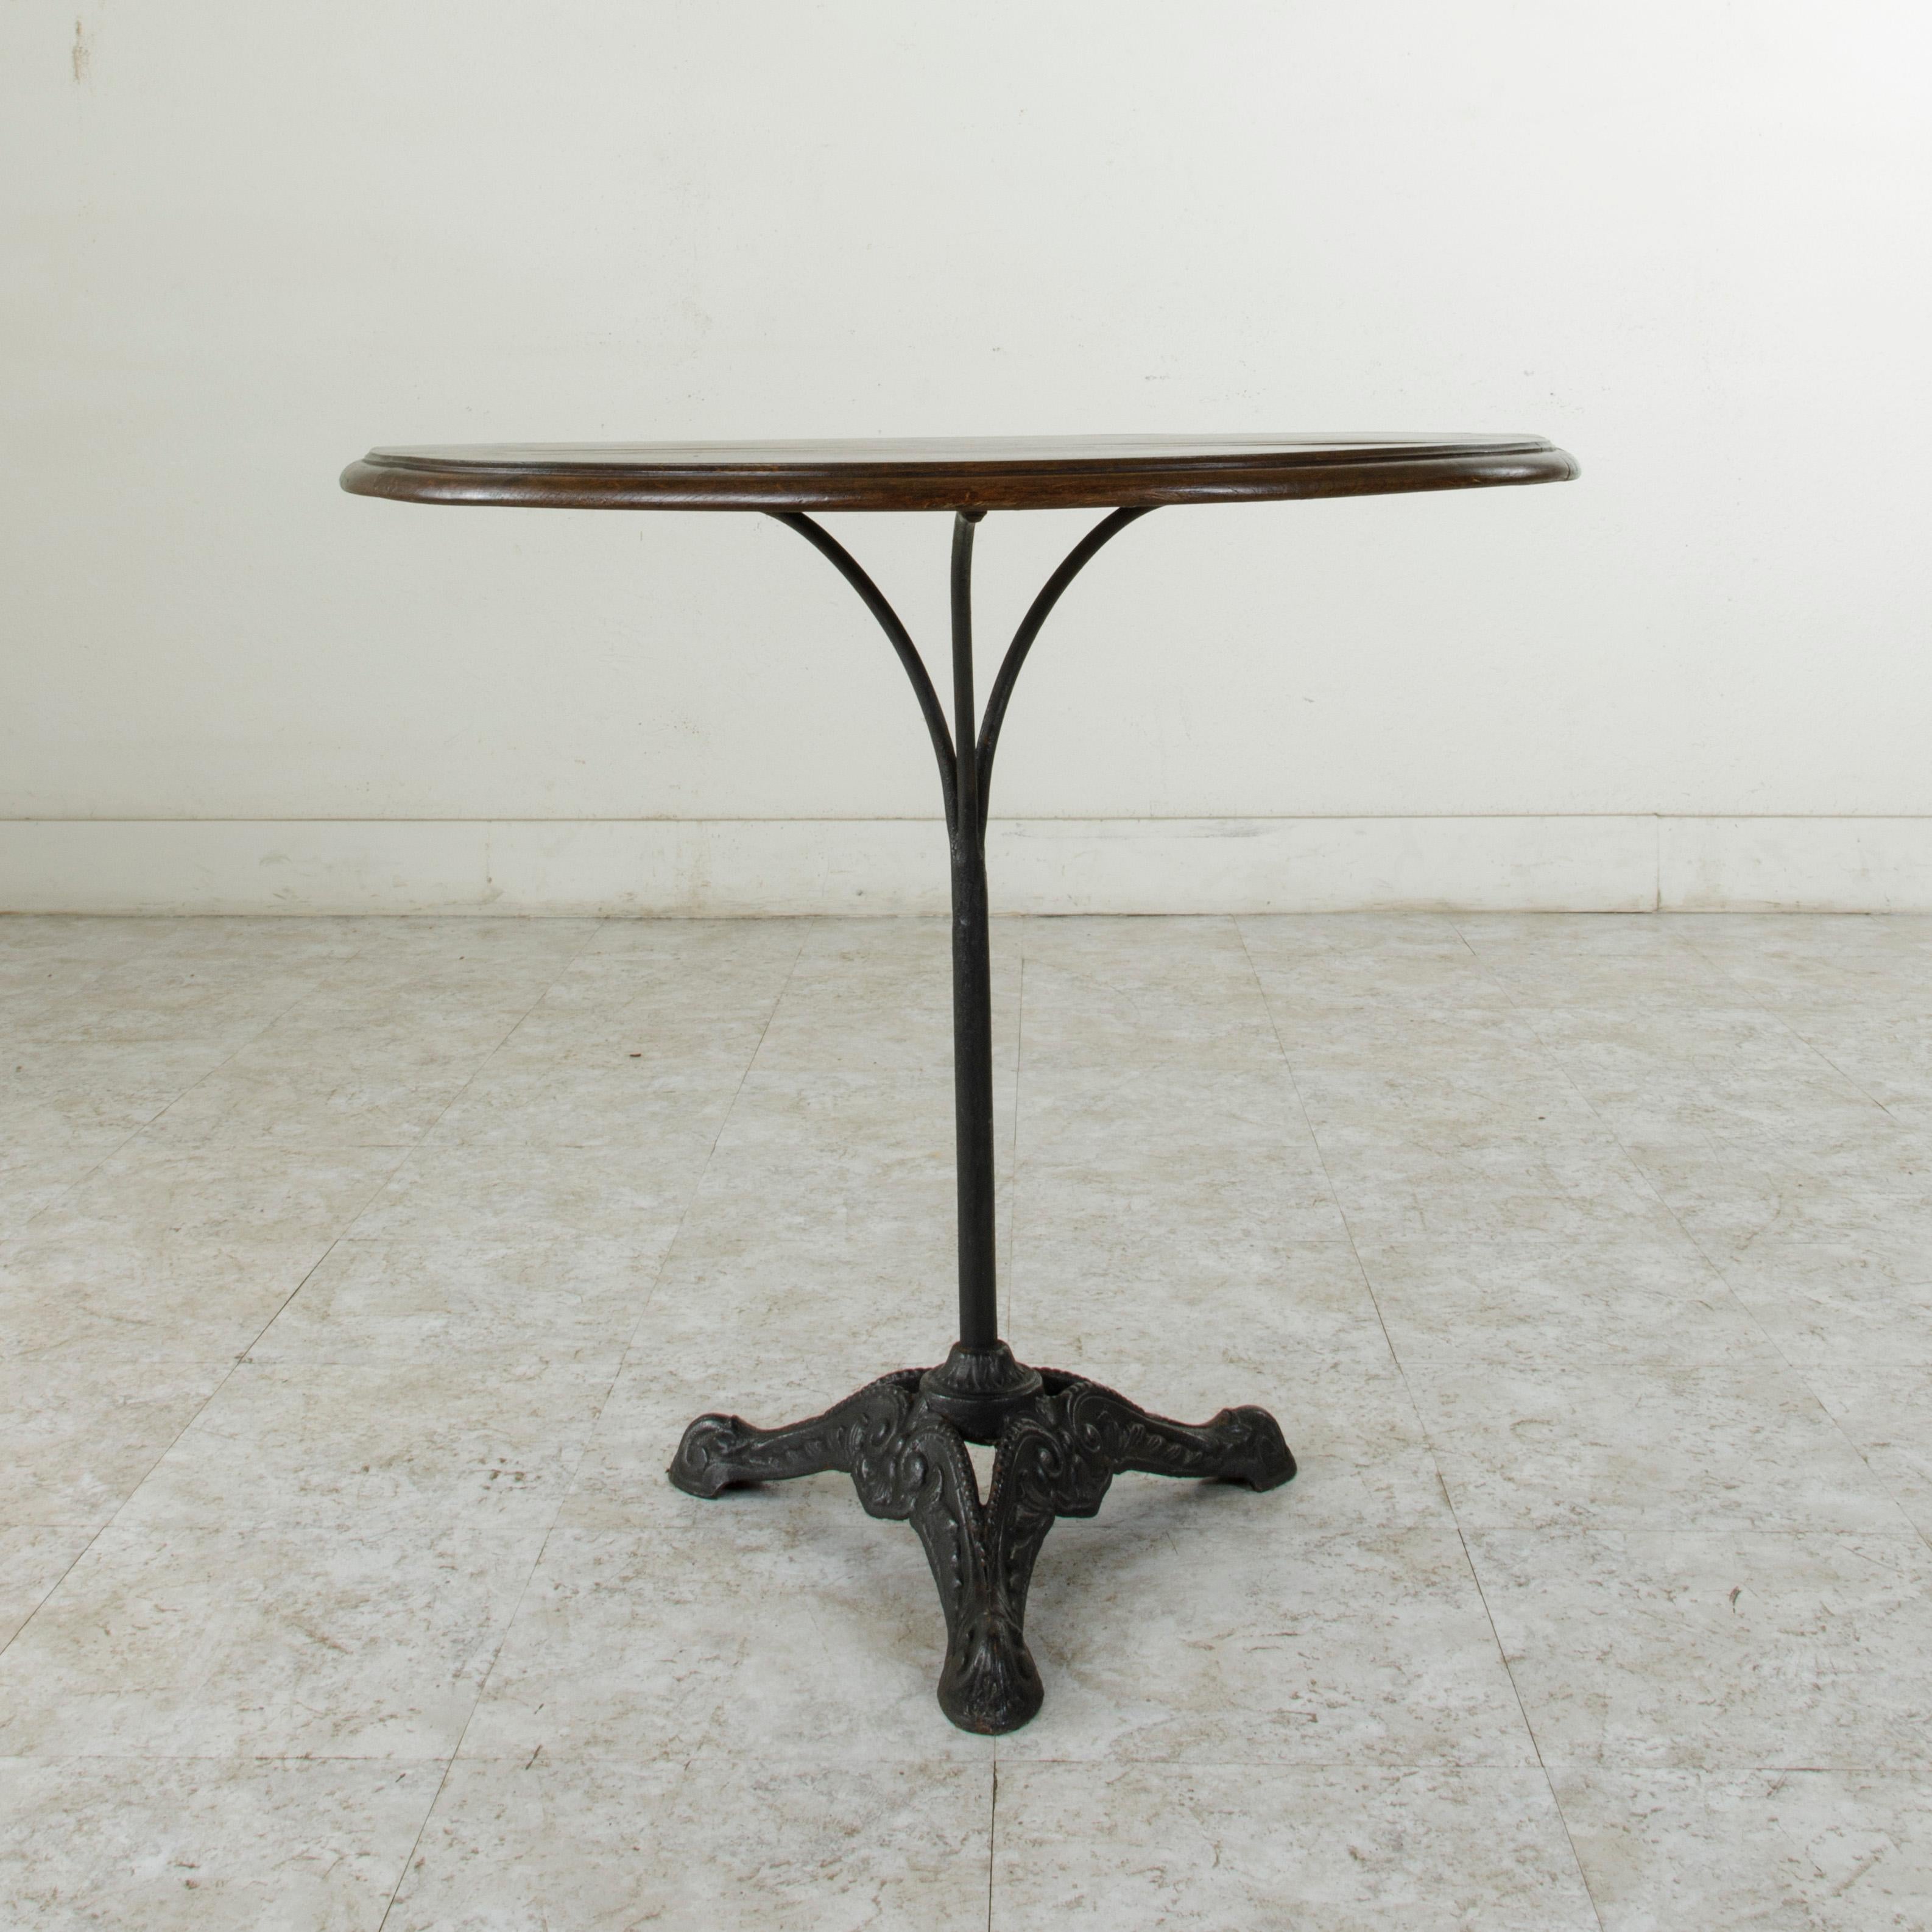 This turn of the 20th century French bistro table or cafe table features a cast iron pedestal base and a 31-inch diameter beveled walnut top. Three arms support the top and join to the central column. The pedestal rests on three feet detailed with